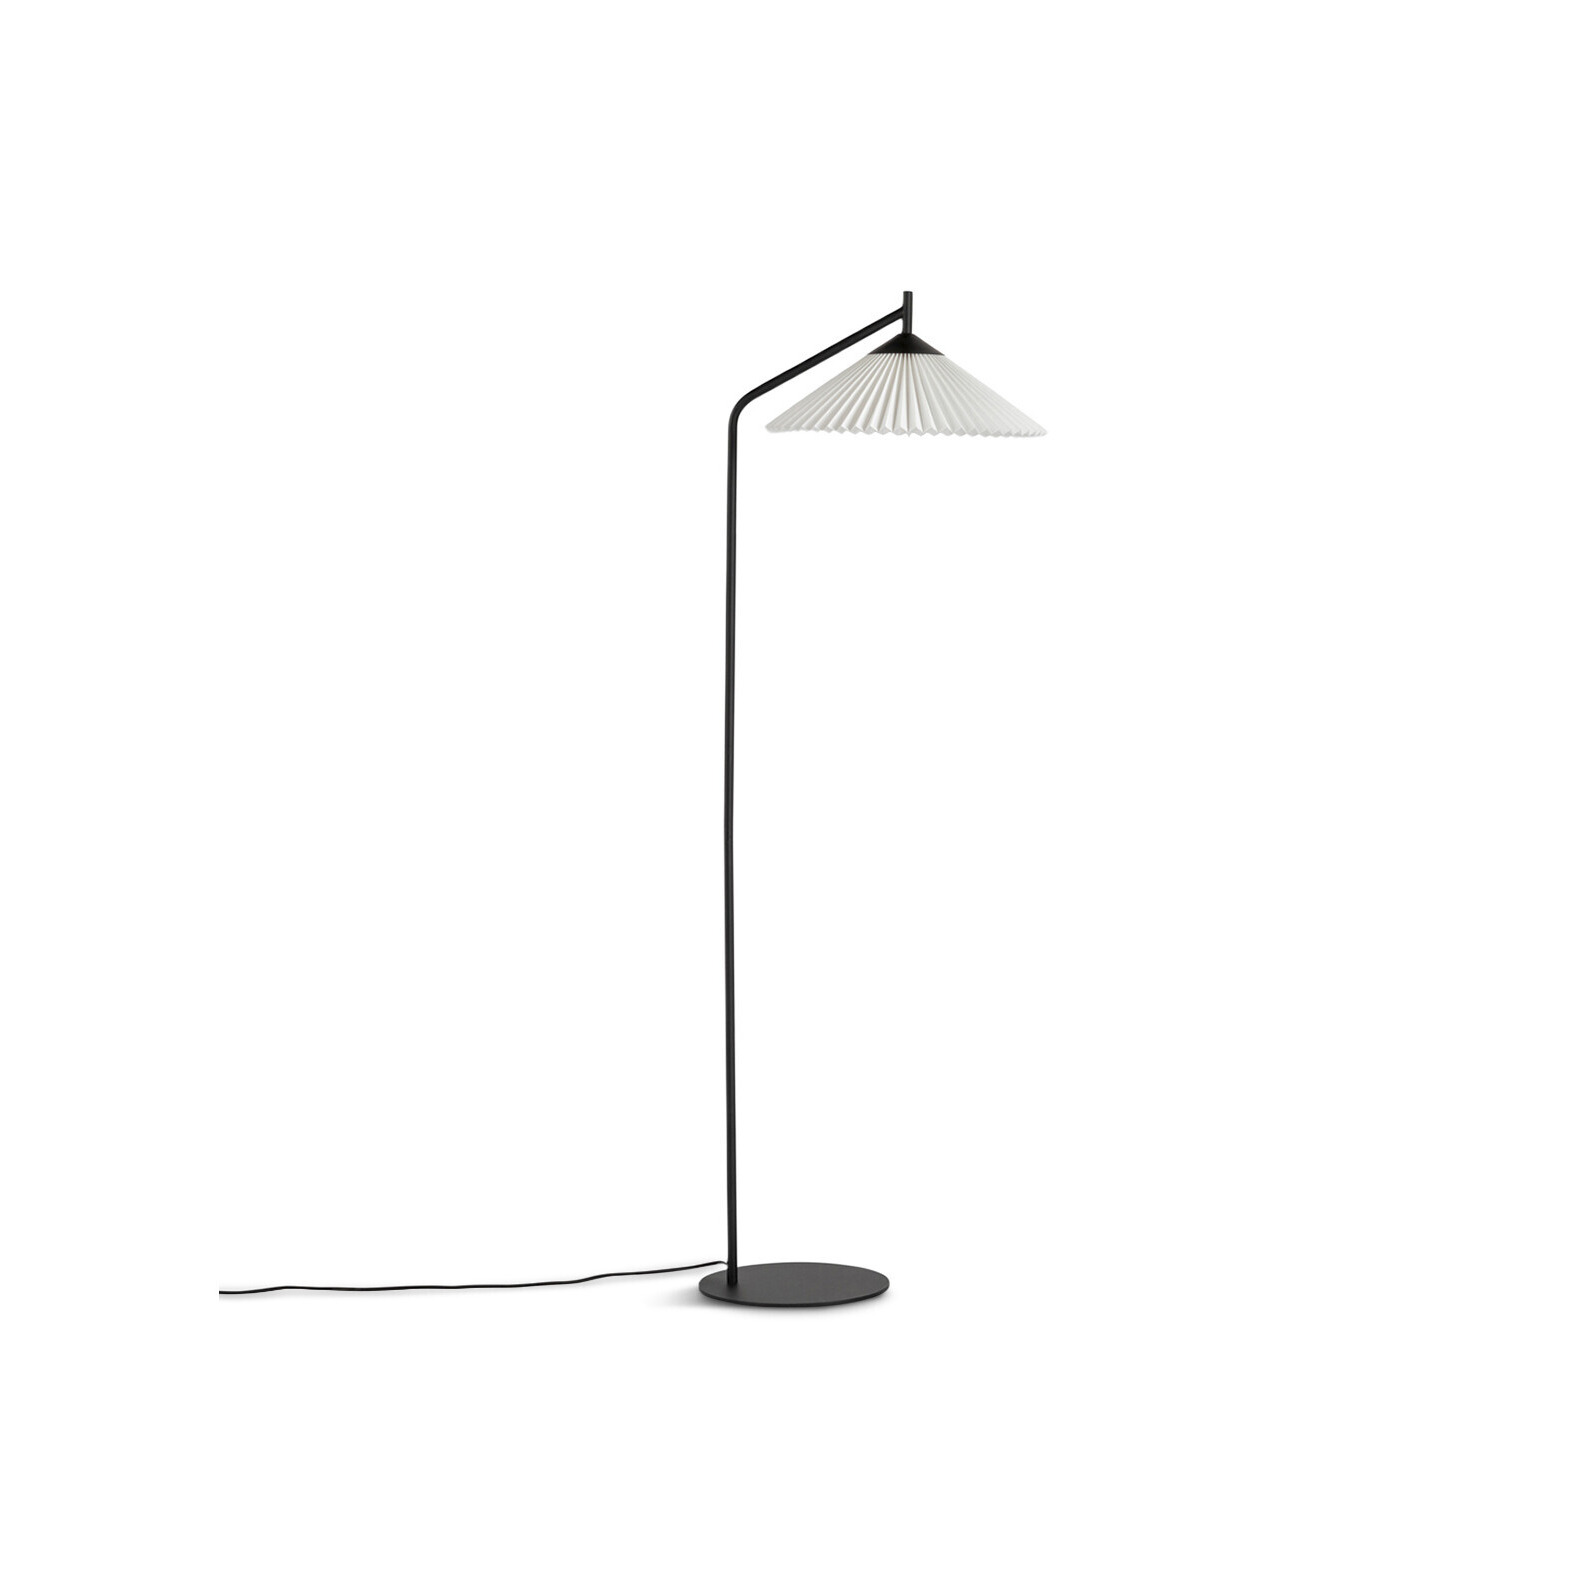 Heal's Pleated Floor Lamp Black/White - Size 145x41x50 - image 1